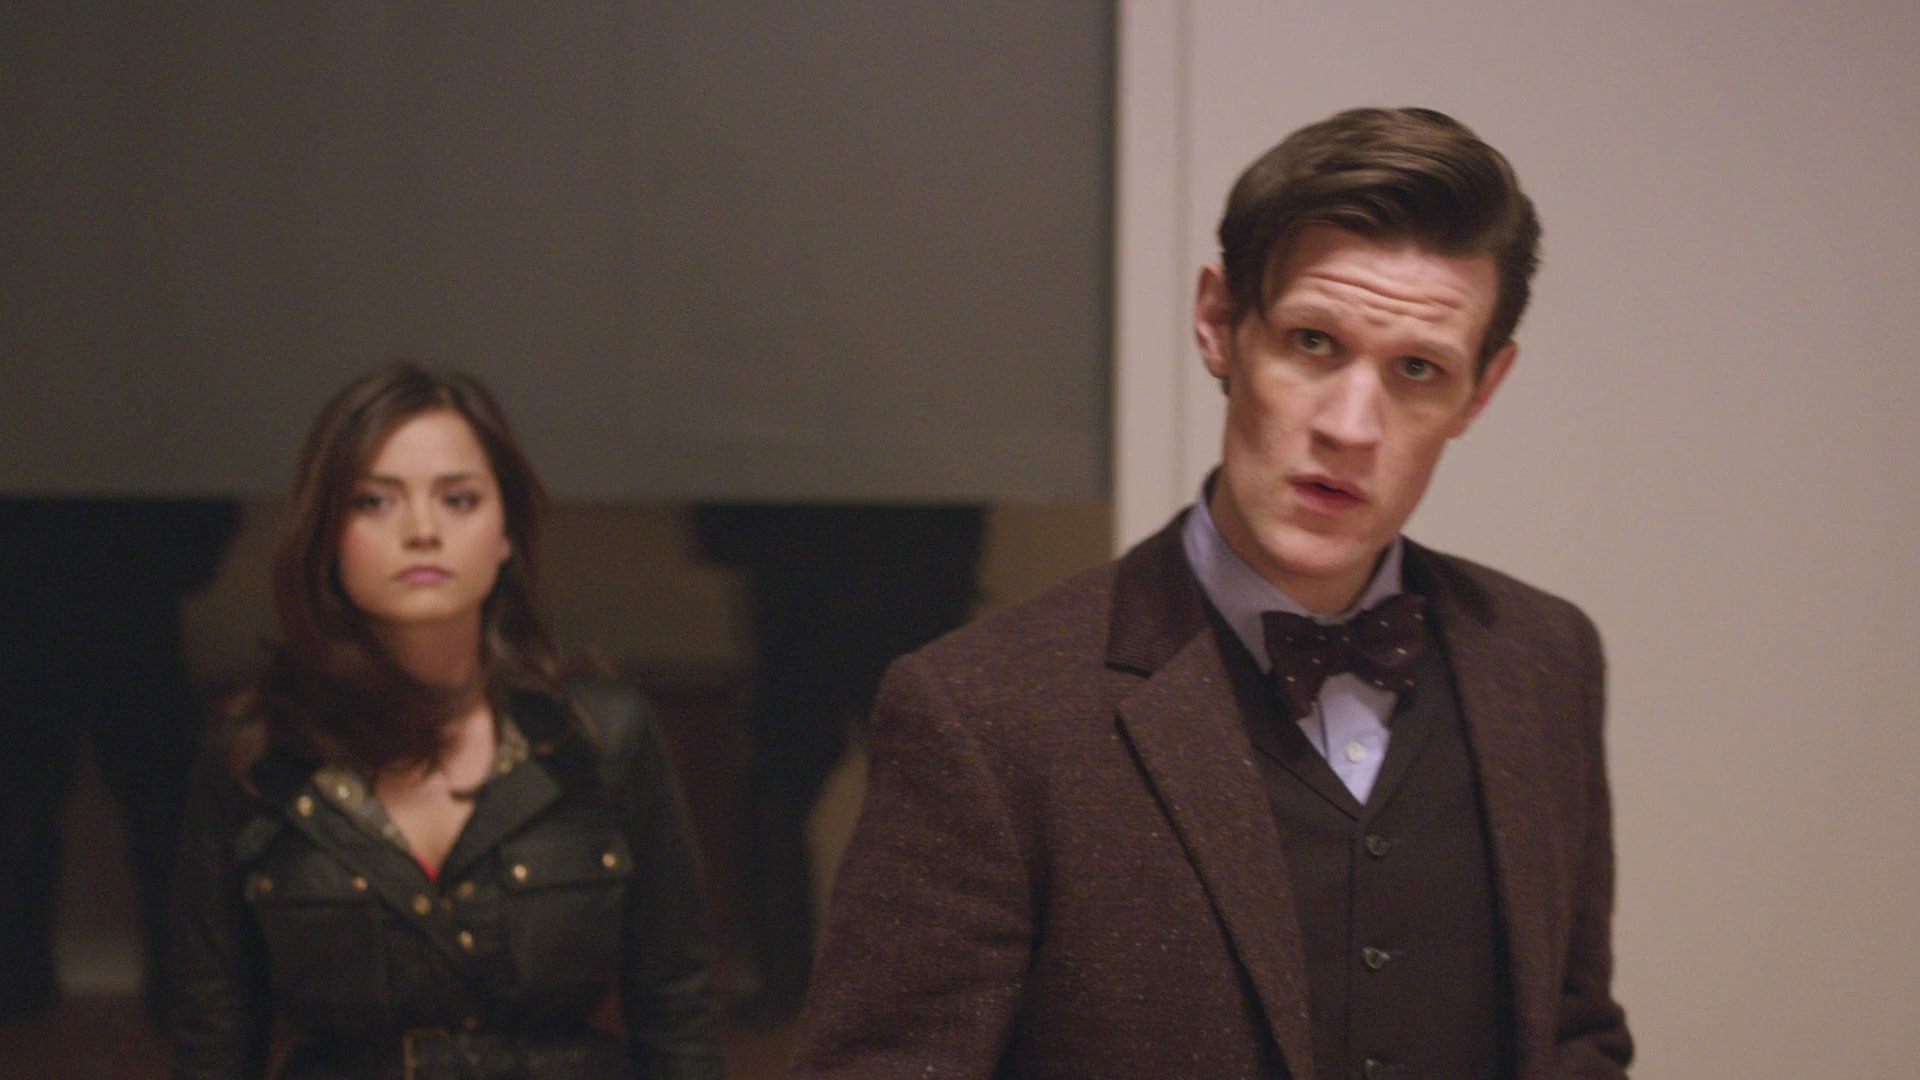 DayOfTheDoctor-Caps-0277.jpg